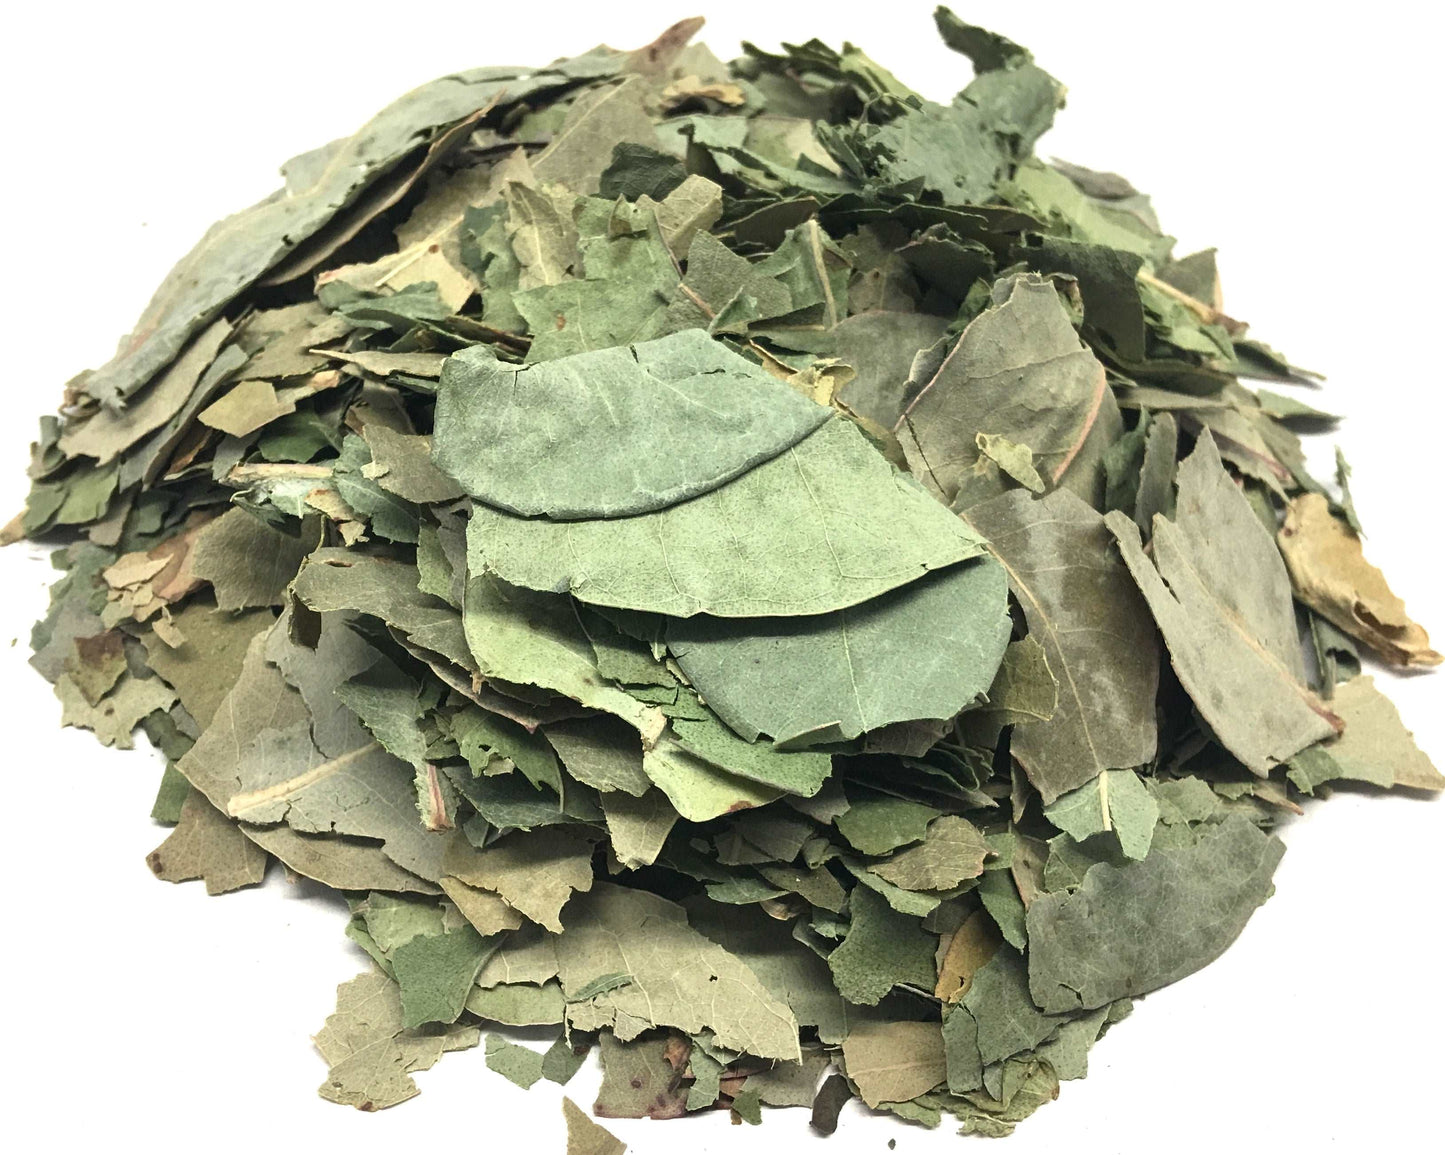  Eucalipto Eucalyptus Loose Leaves Herbal Infusion Tea Value pack (120g) by Nuestra Salud sold by NS Herbs Co.